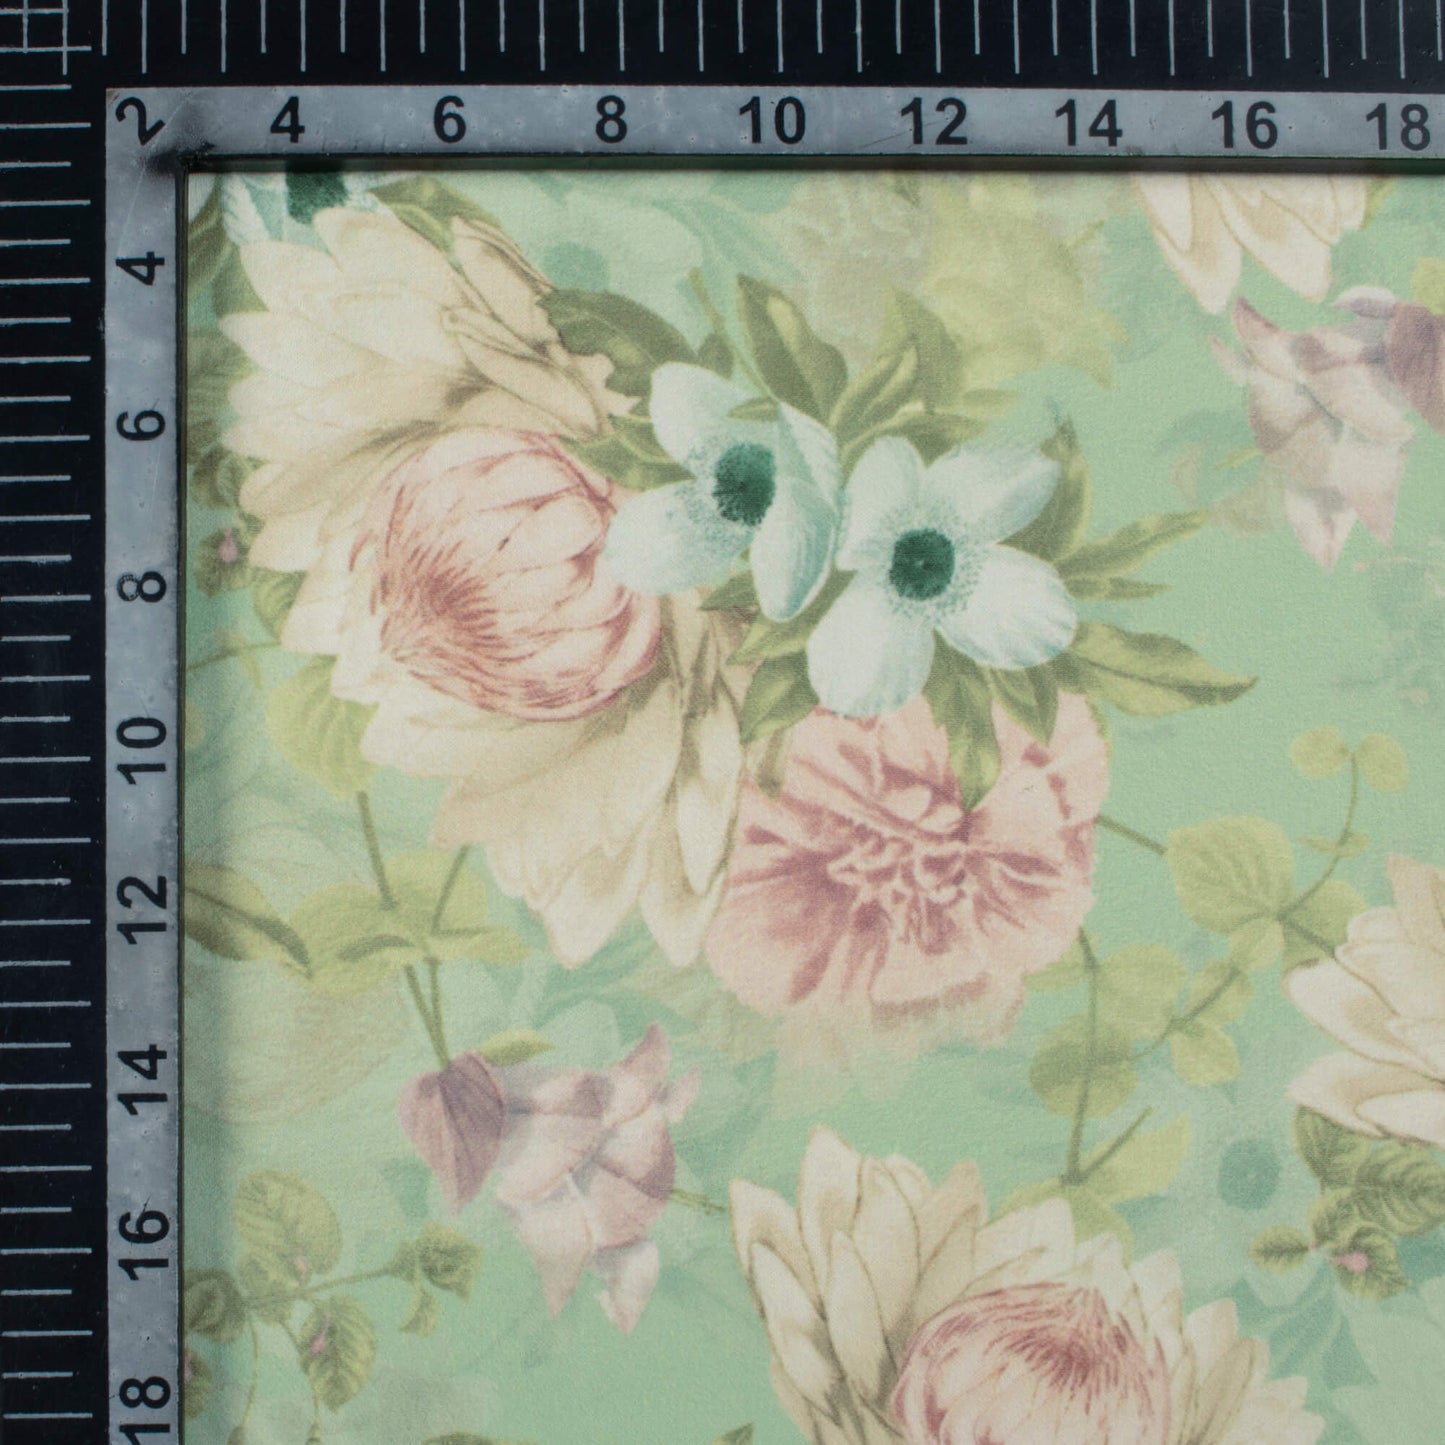 Swamp Green And Pink Floral Pattern Digital Print Georgette Fabric